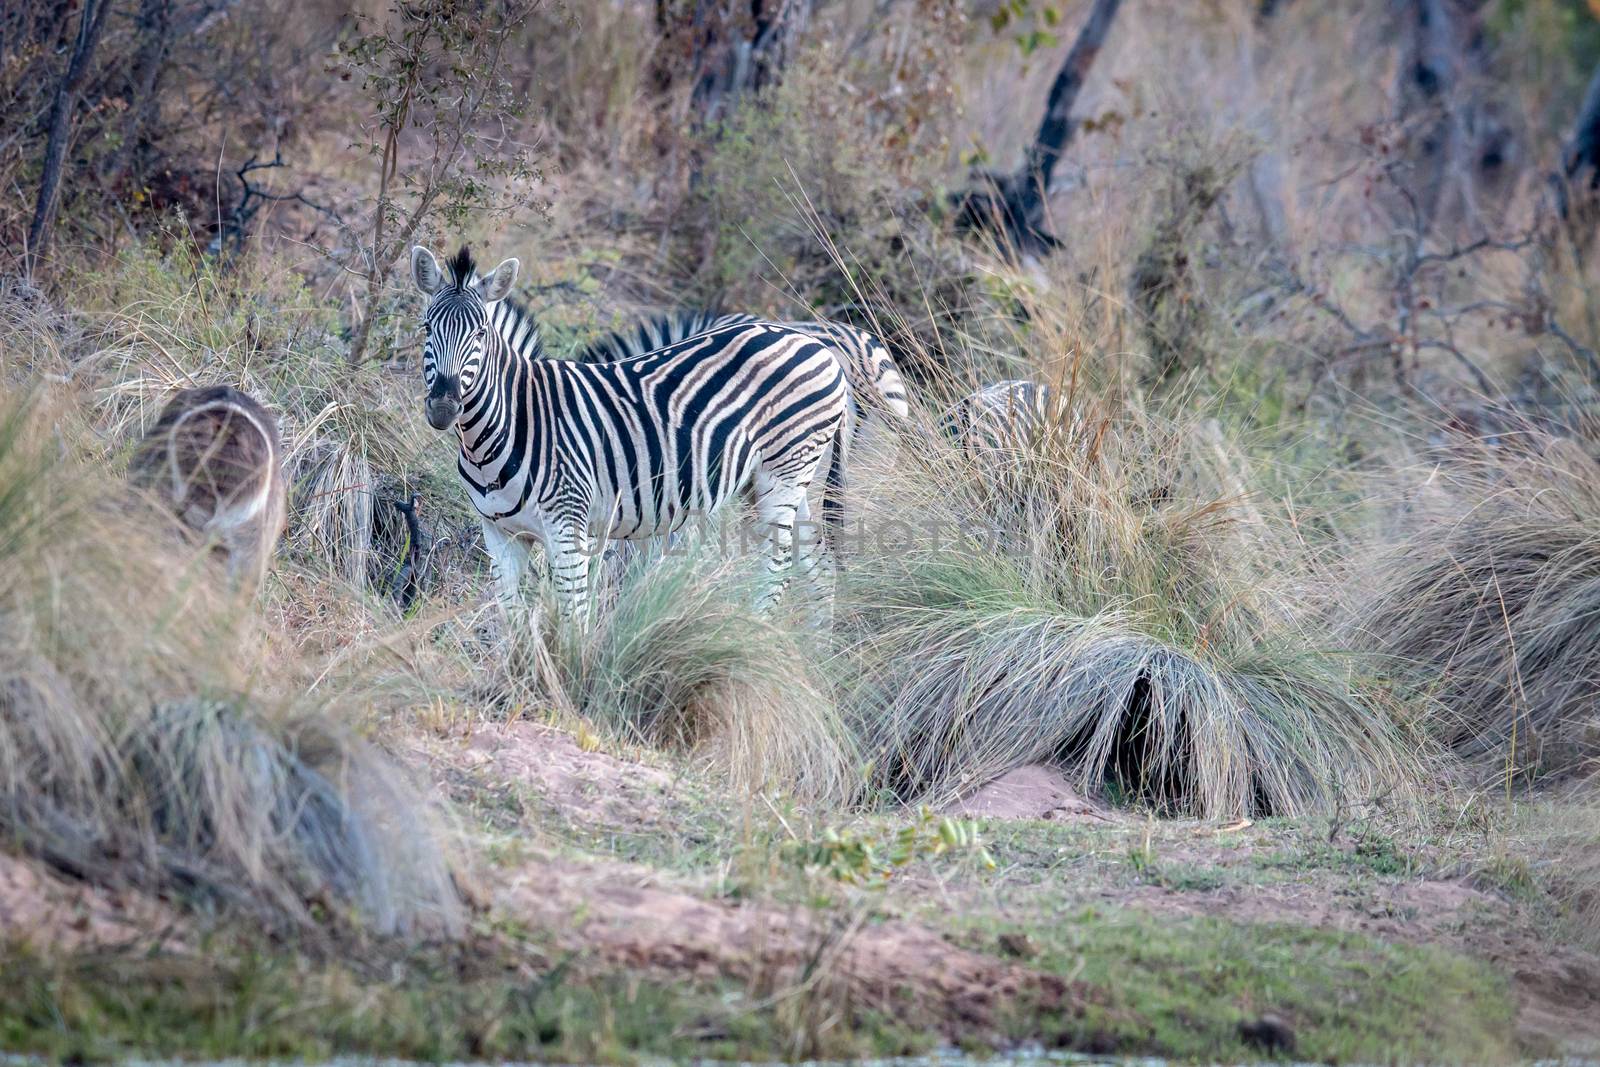 Zebra standing in the grass in the bush. by Simoneemanphotography